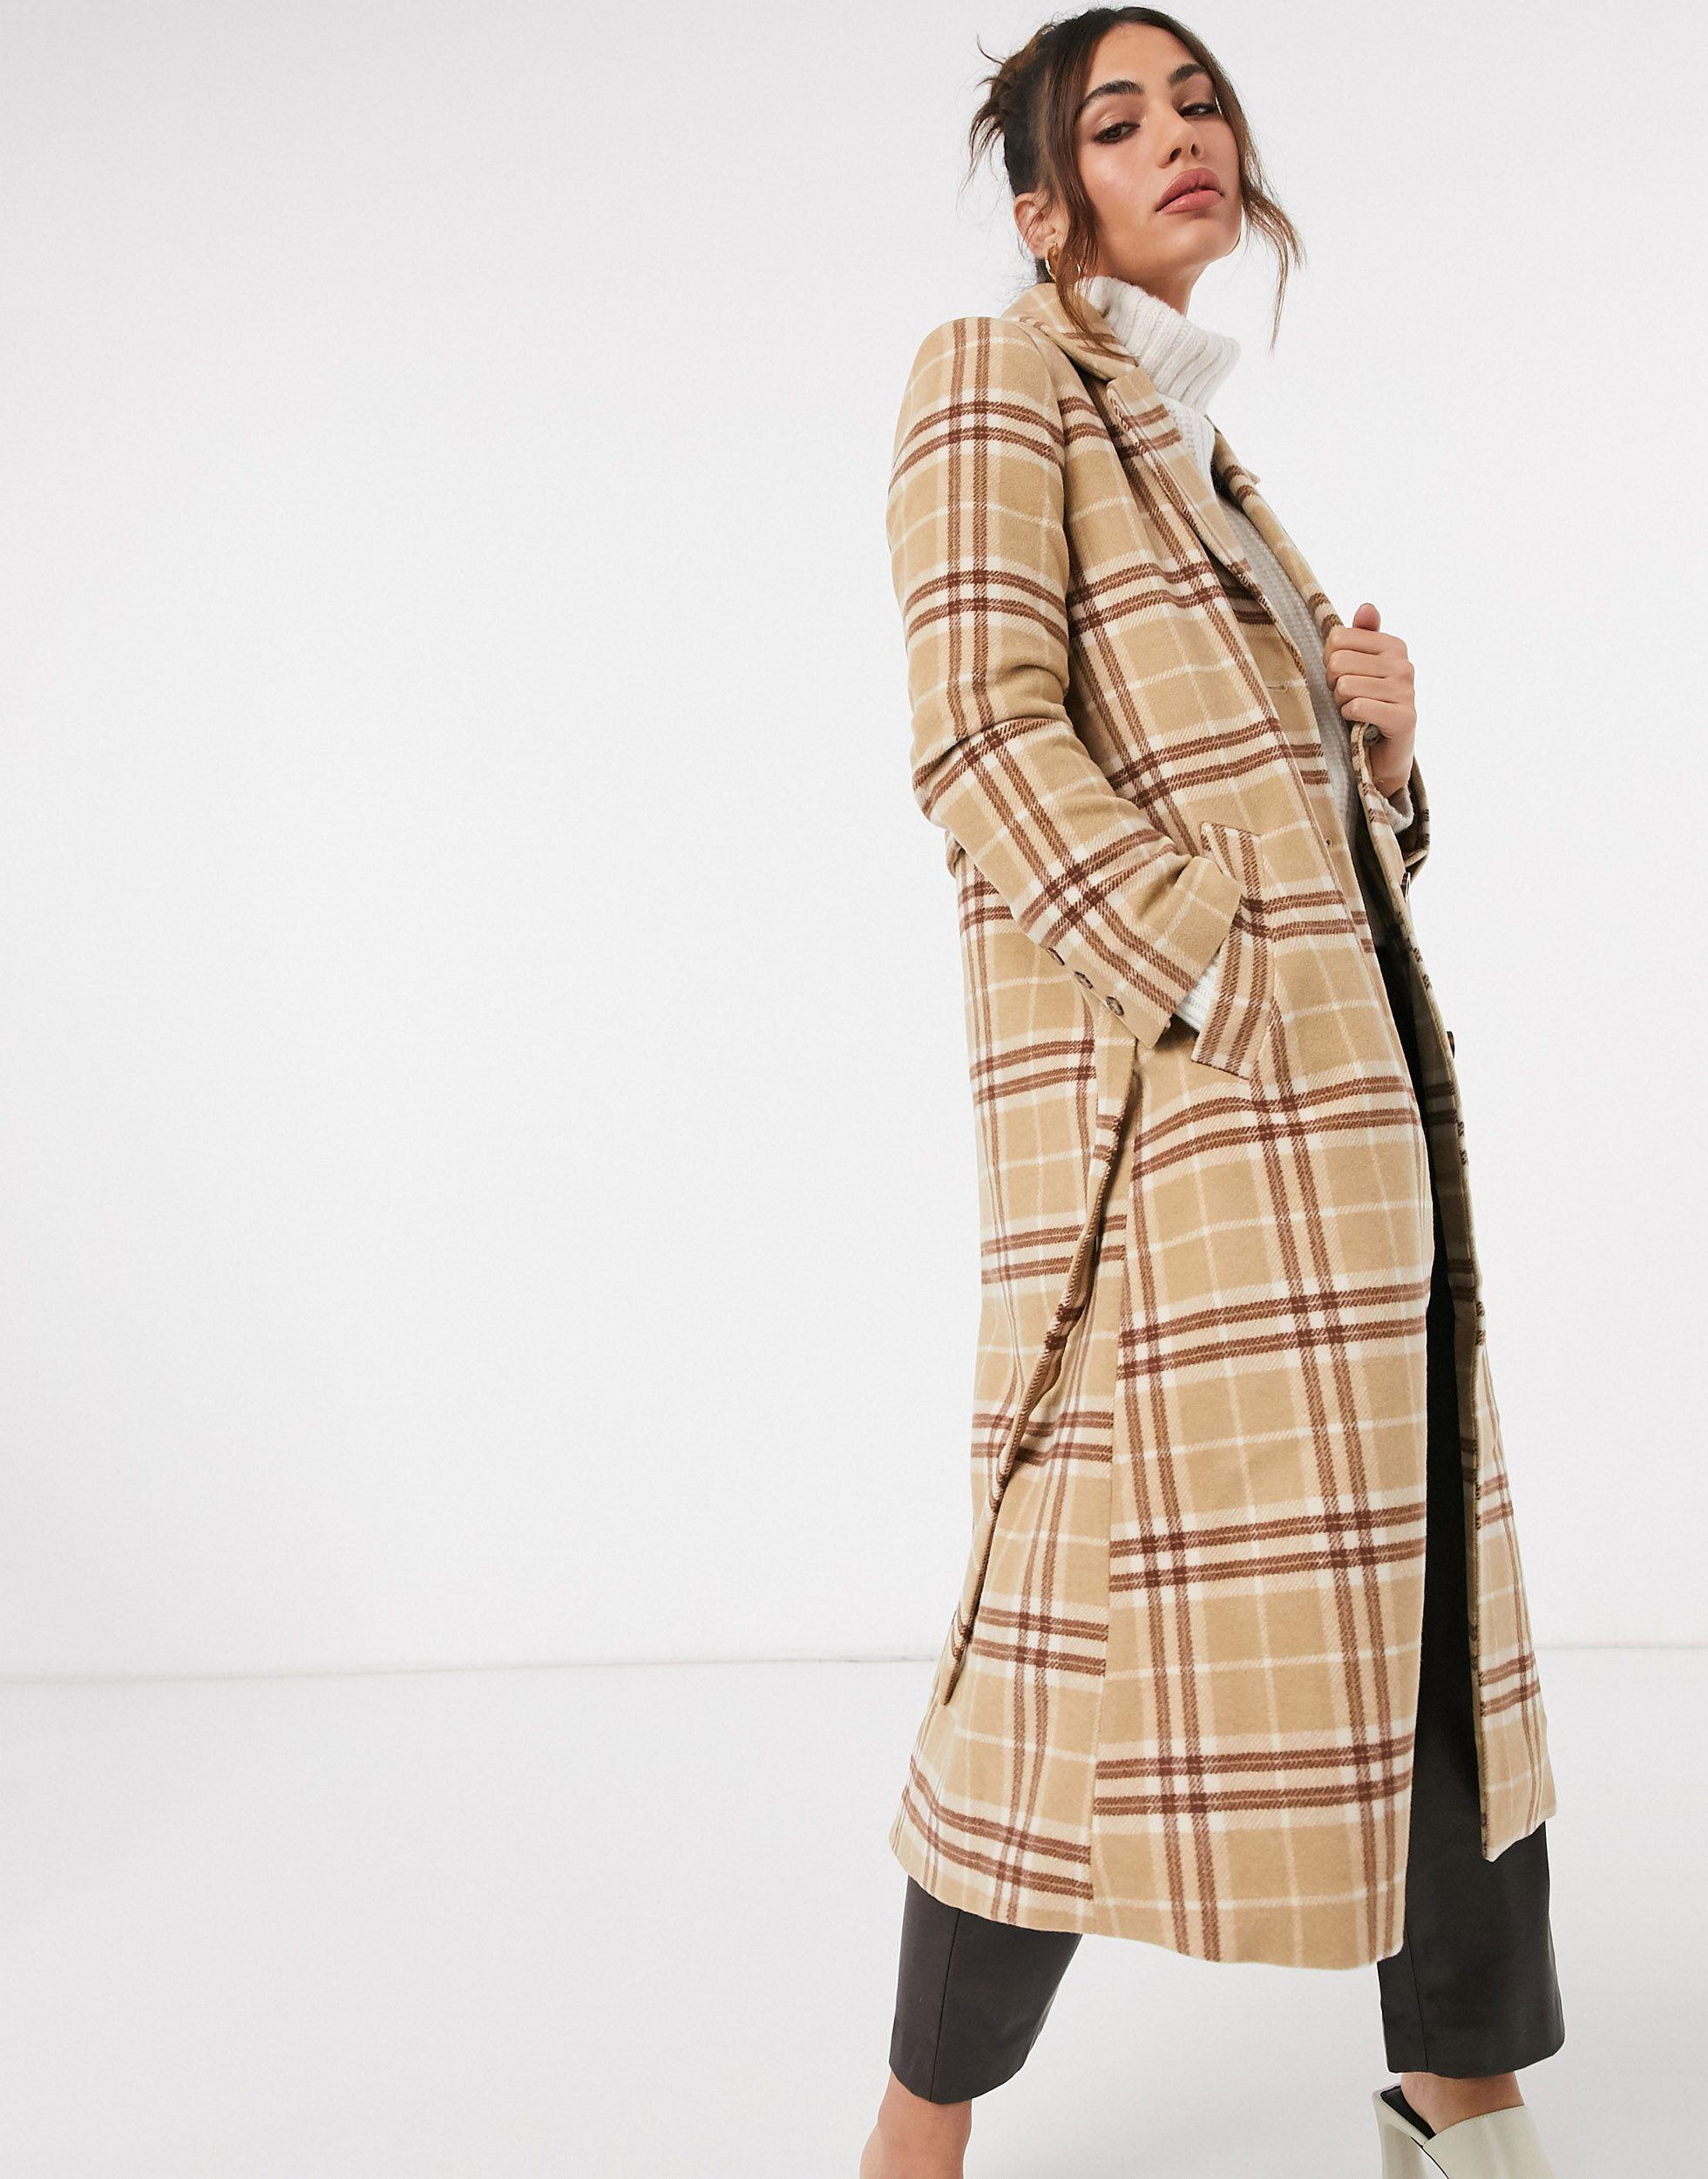 & Other Stories Wool Blend Belted Check Coat in Brown - Lyst